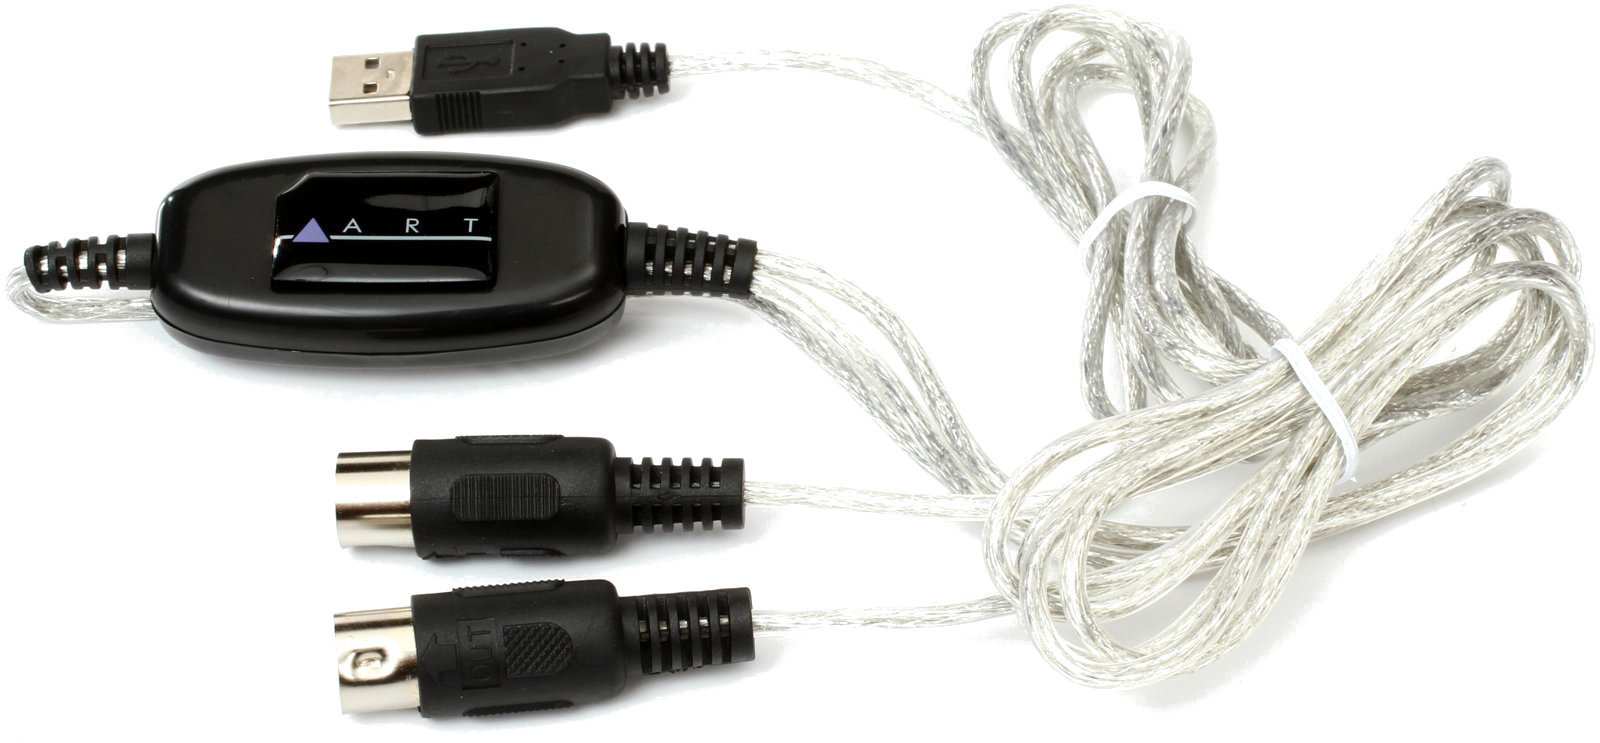 Interface audio USB ART Mconnect USB-To-MIDI Cable